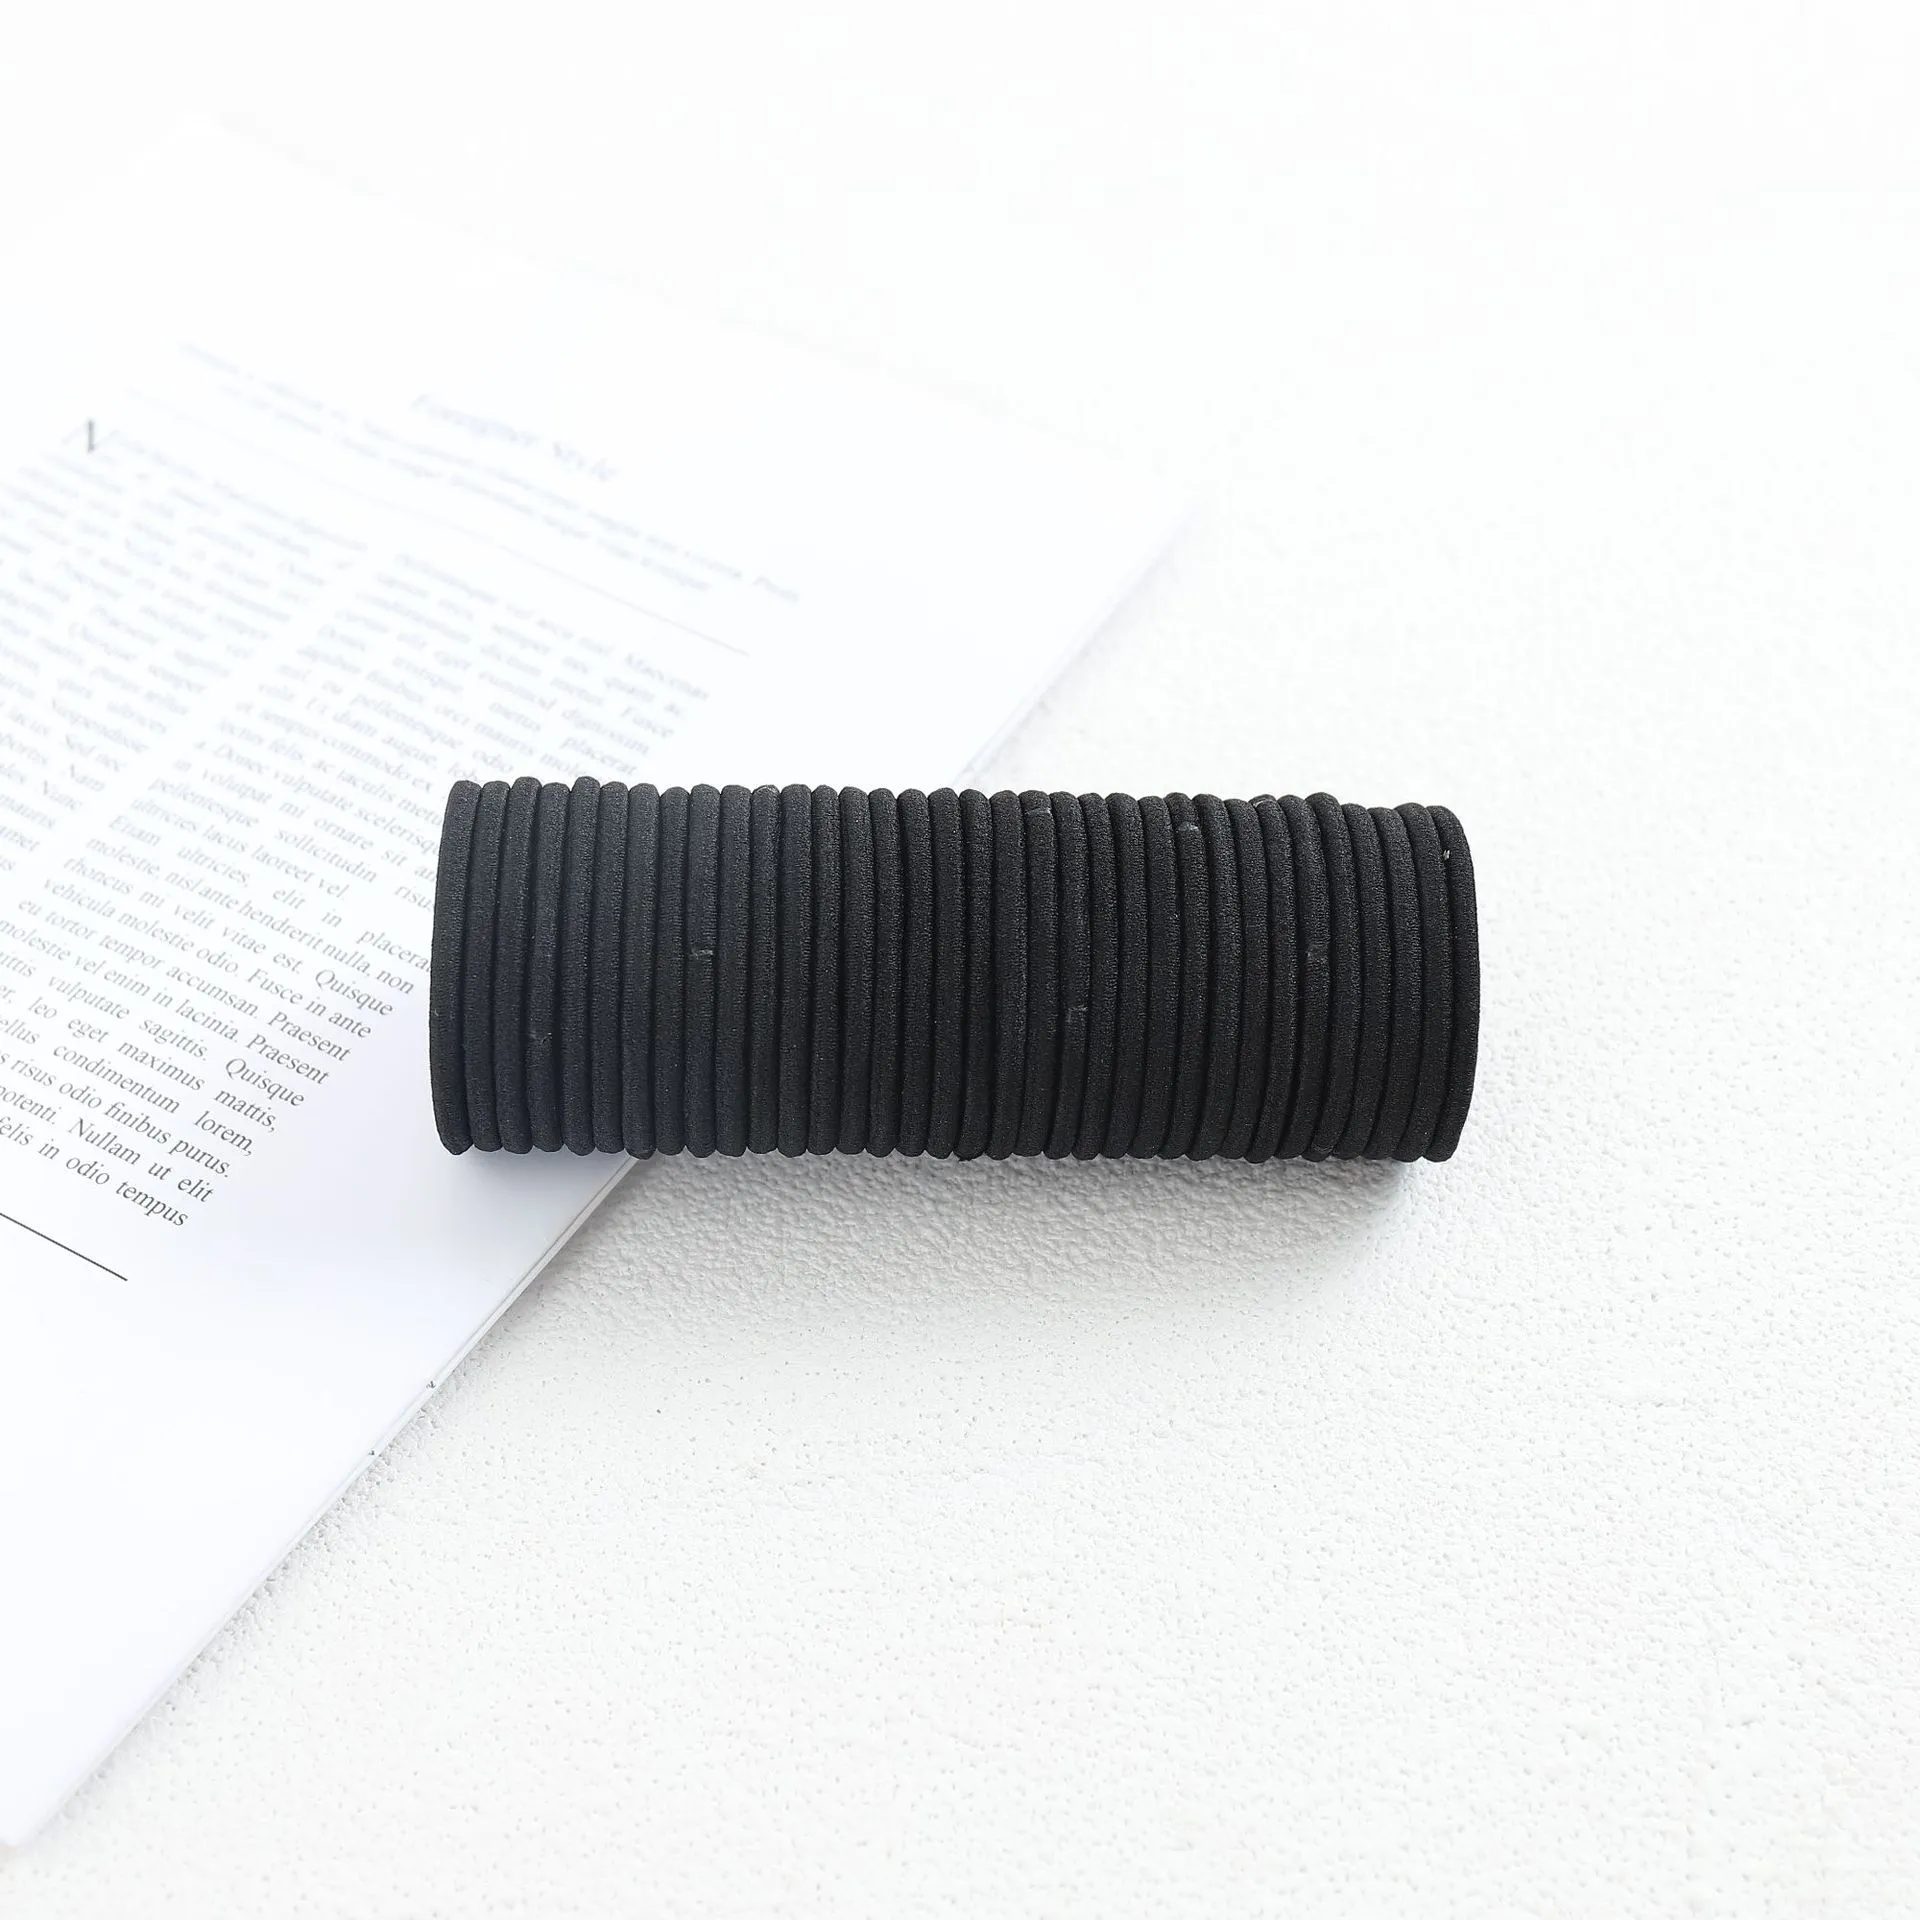 Black Color 50X4mm Elastic Bands Rubber Band School Kid Office Home Accessories Stretchable Band Sturdy Rubber Ring